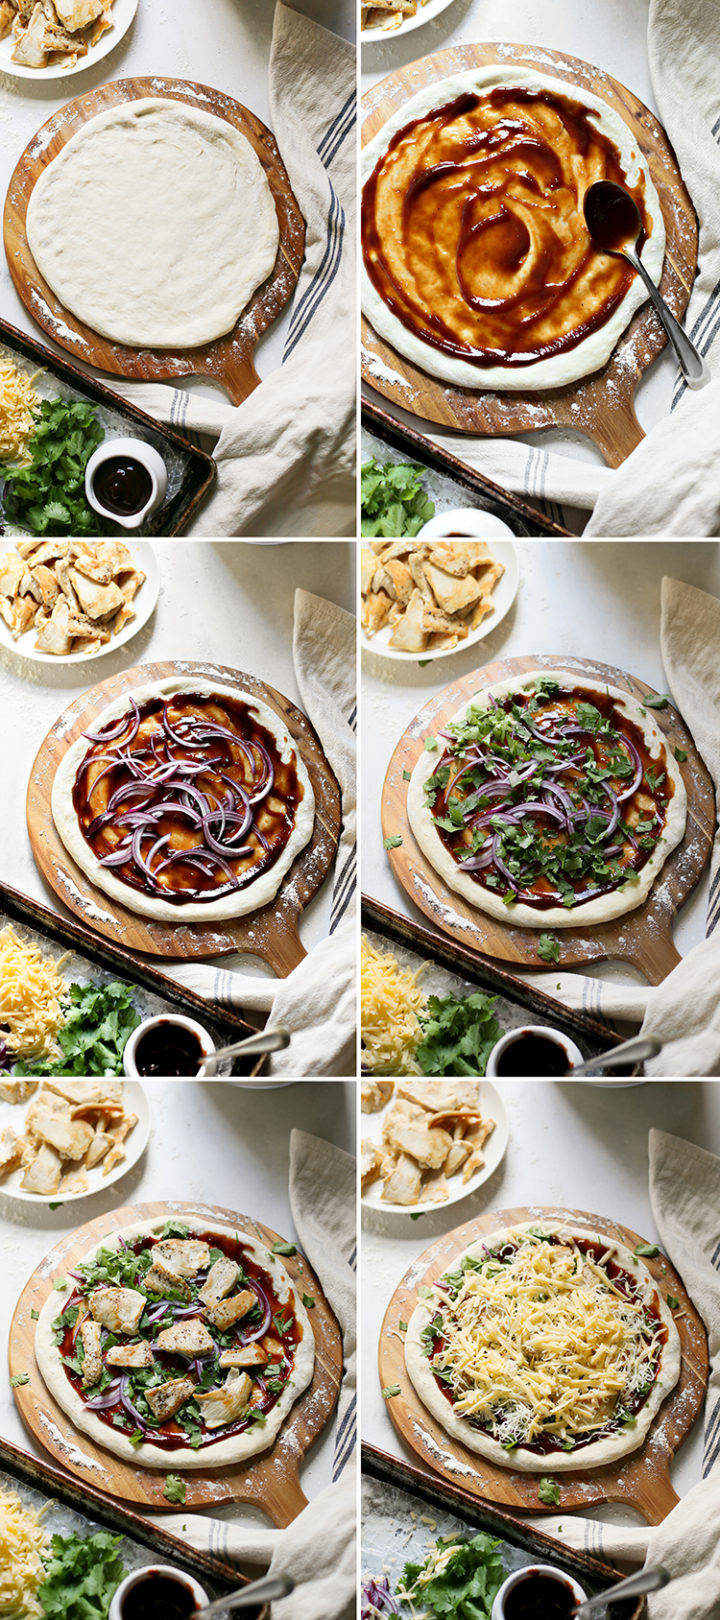 step by step photos of the recipe steps - how to make bbq chicken pizza